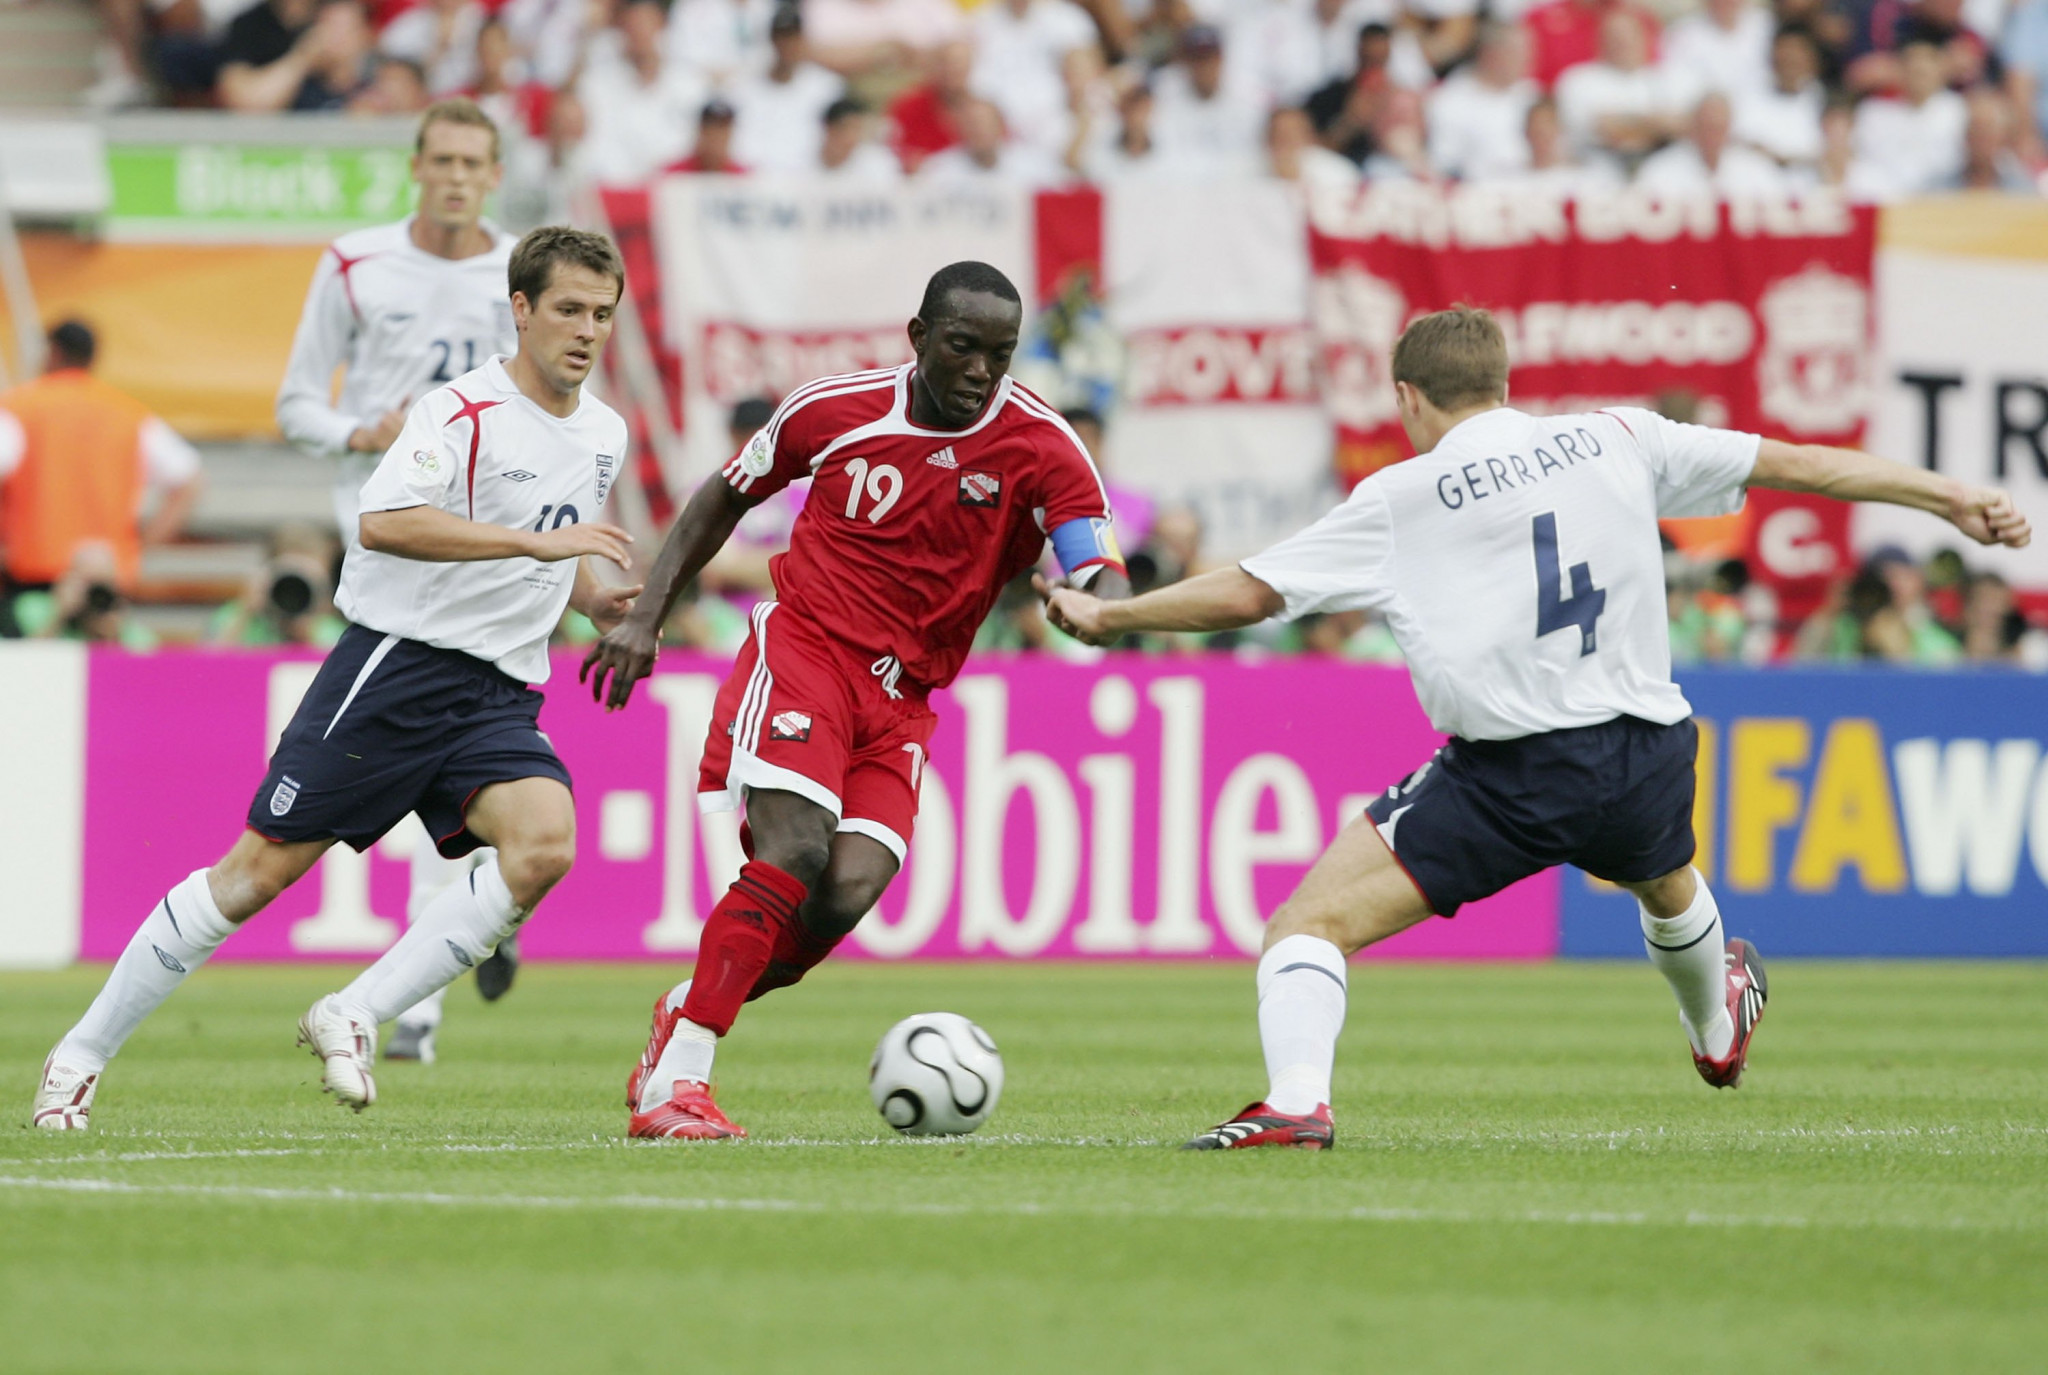 Dwight Yorke captained Trinidad and Tobago in their only appearance at the FIFA World Cup, in Germany in 2006 ©Getty Images